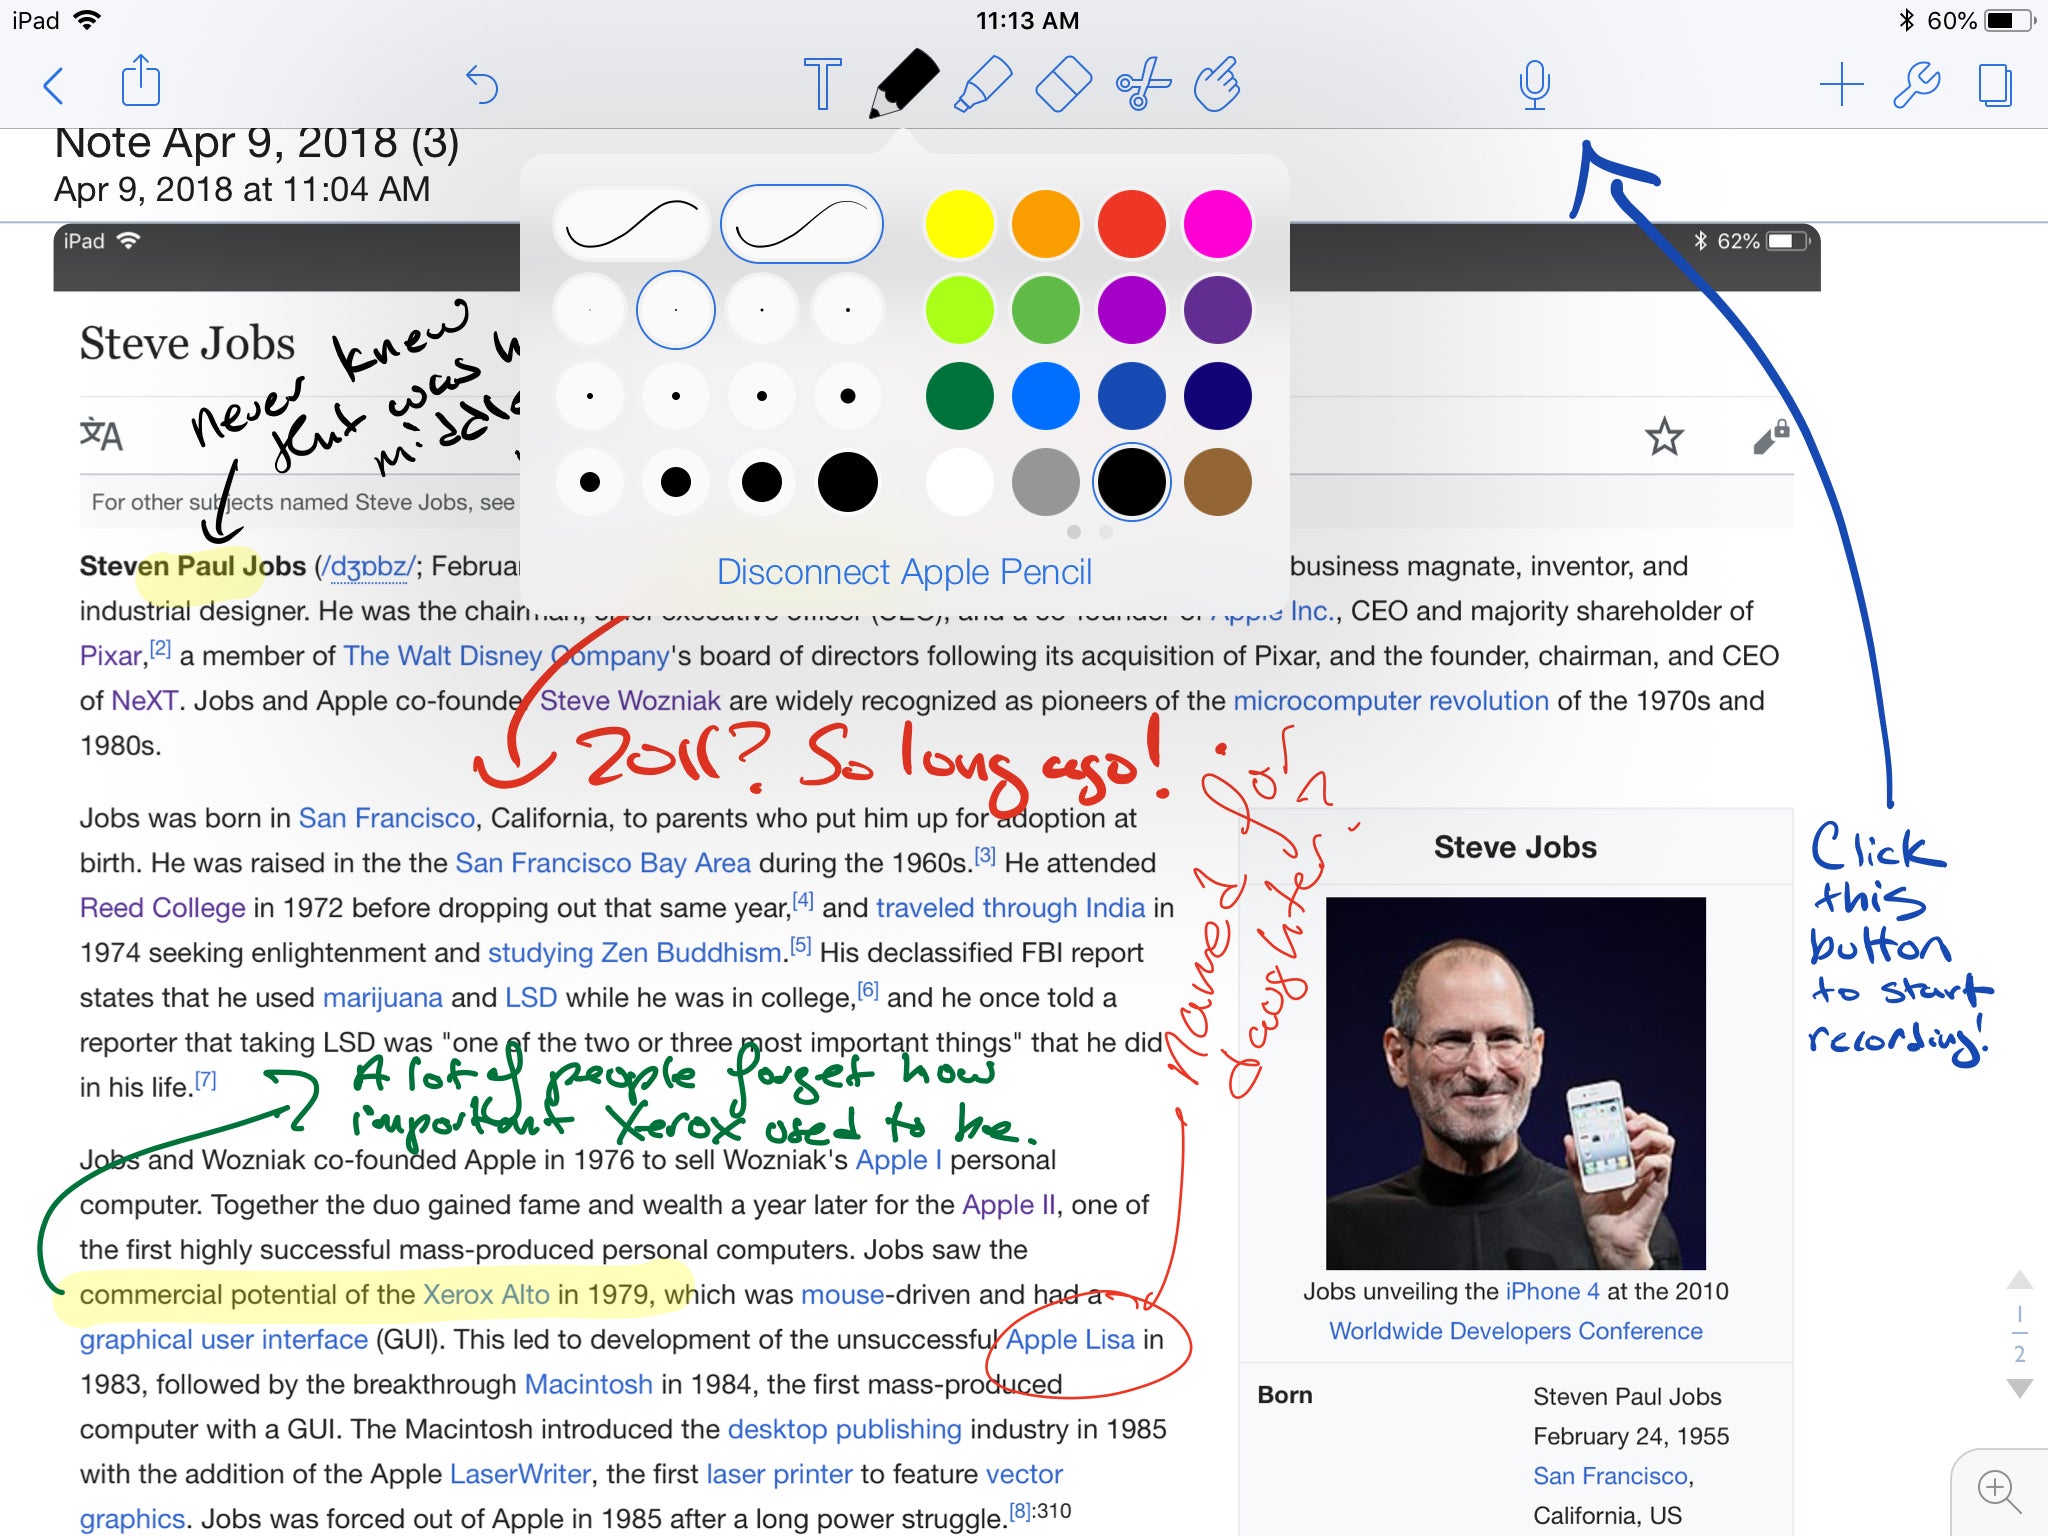 notability app for windows surface